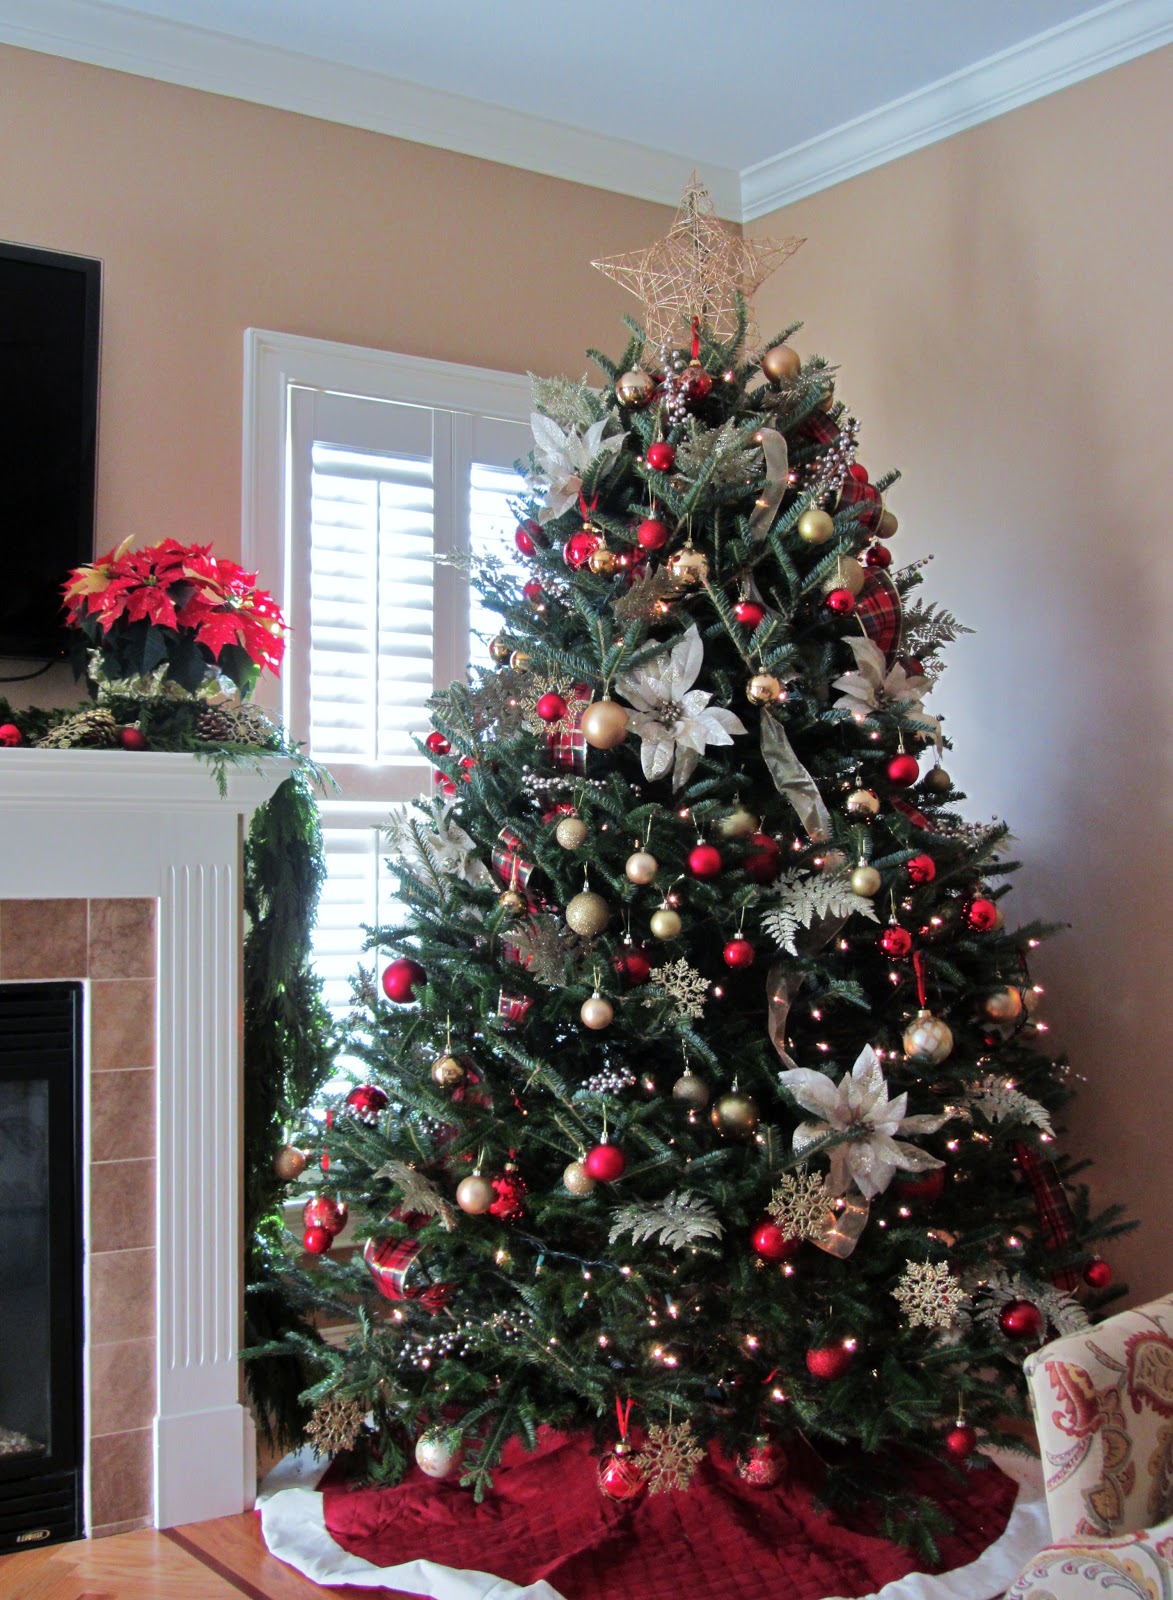 Christmas Tree Decorations Ideas and Tips To Decorate It